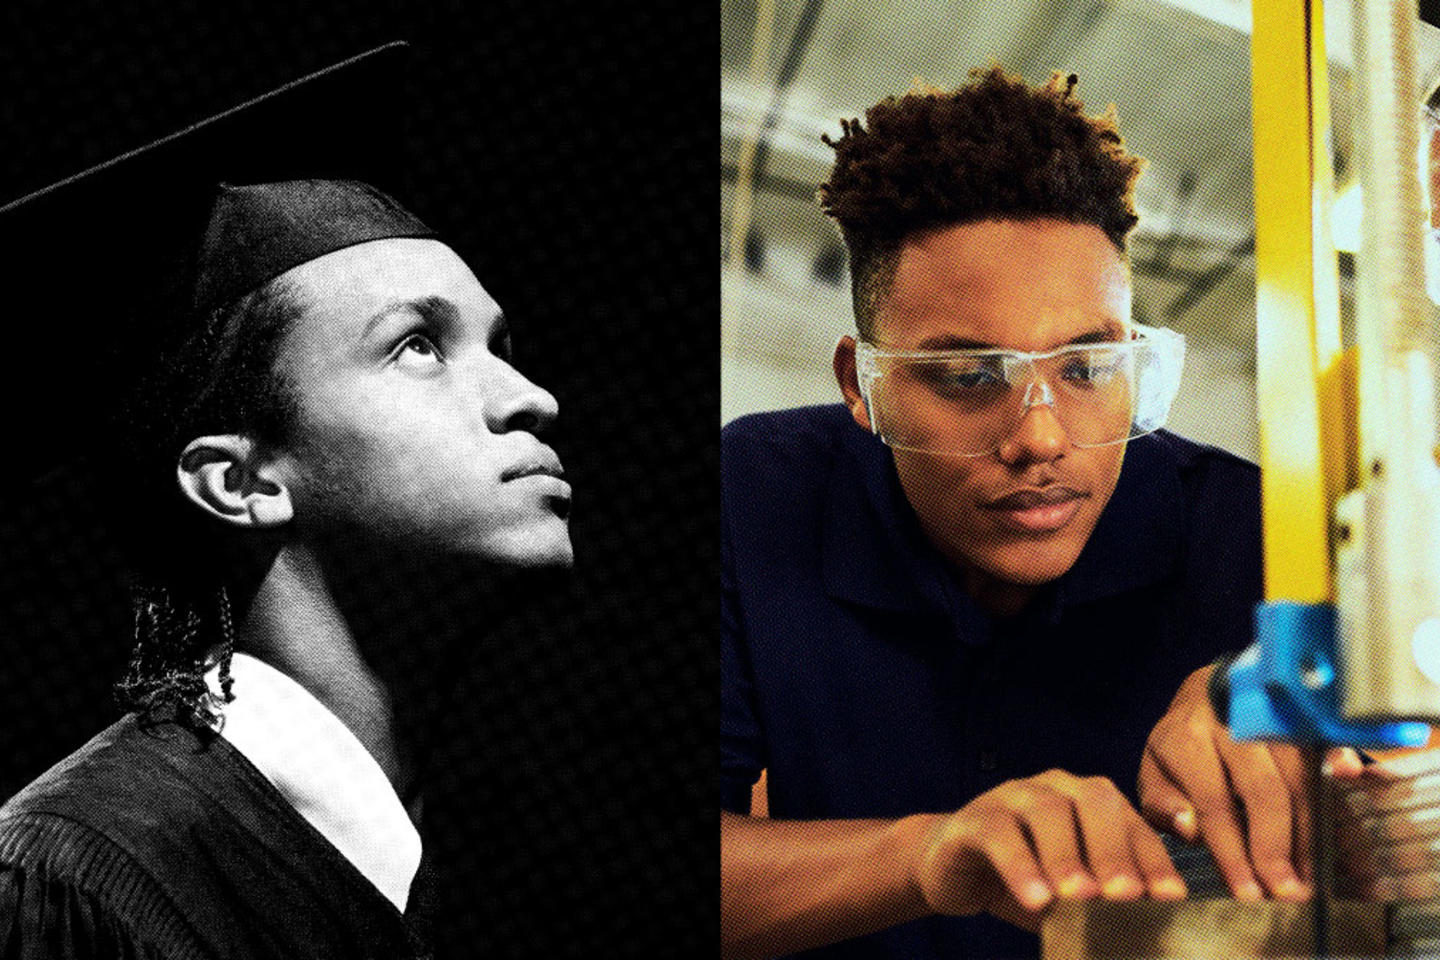 On the left is a black-and-white image of a man in a graduation cap and gown, while on the right is a color image of a man wearing safety glasses